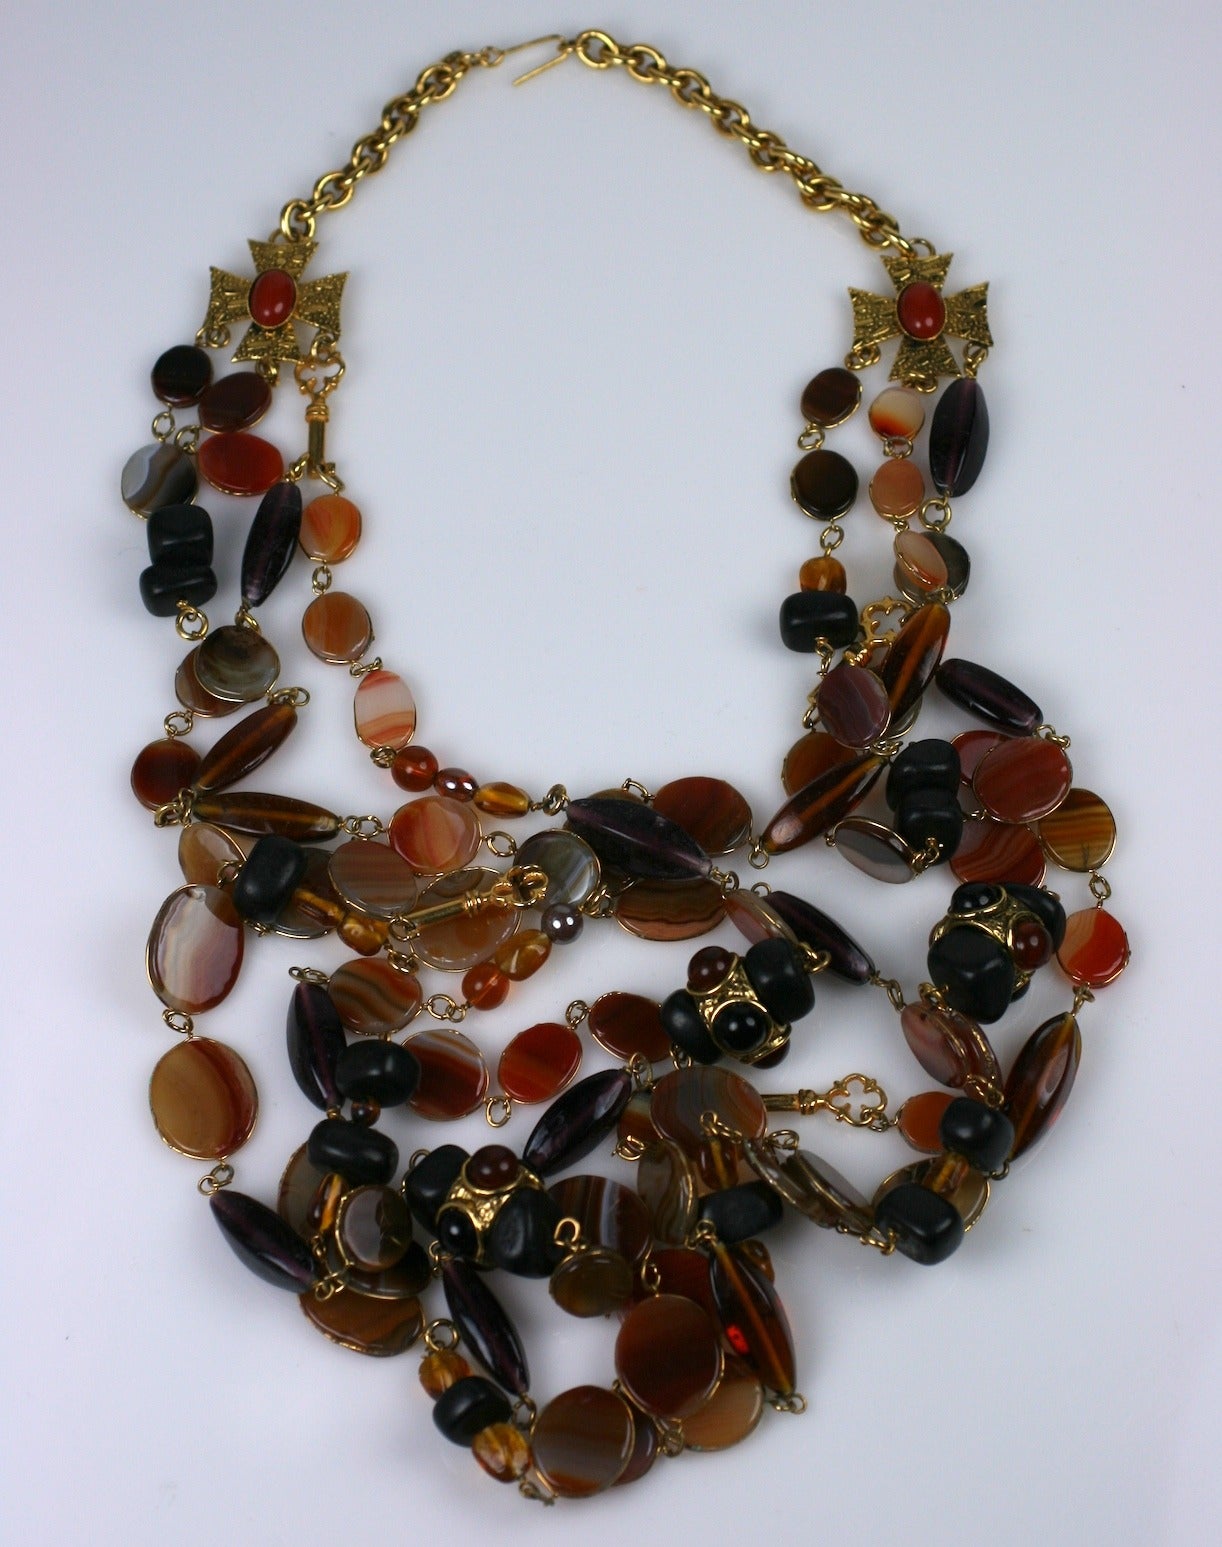 Phillipe Ferrandis' super long multi-strand necklace of bezel set genuine striped agates mixed with gilt keys and wood stations embellished with jet and amber pate de verre cabochons. All the strands hang from a pair of maltese cross stations